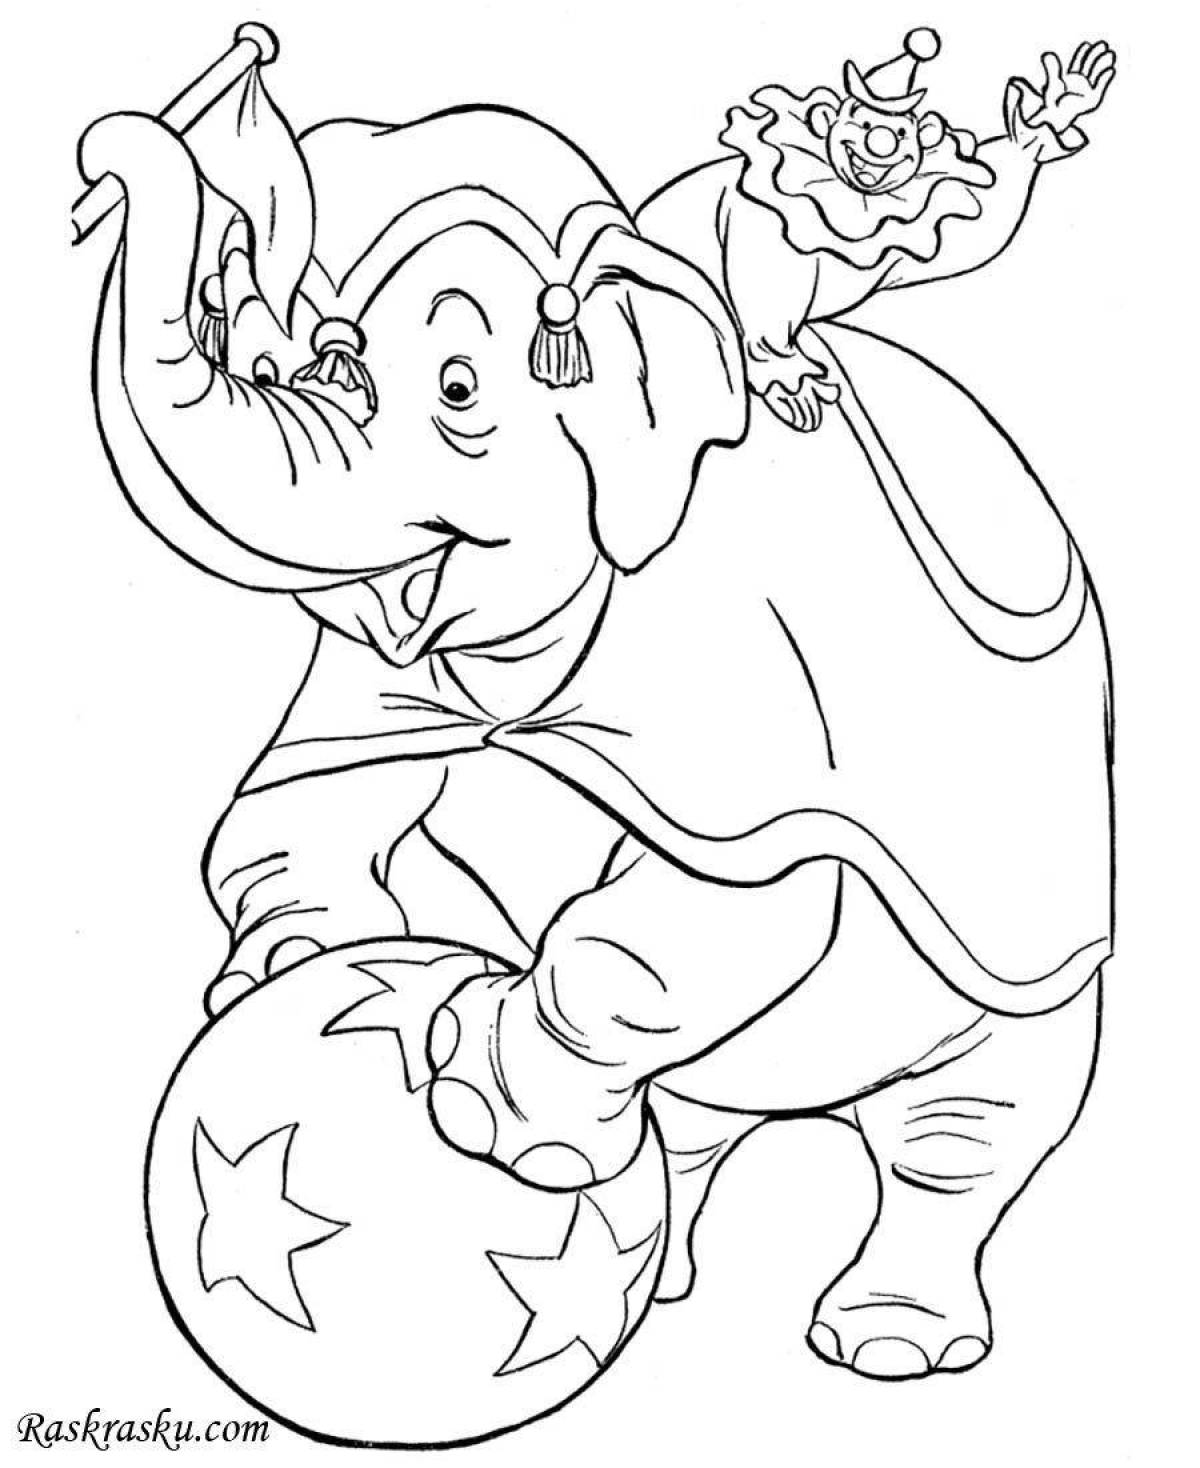 Exciting circus coloring book